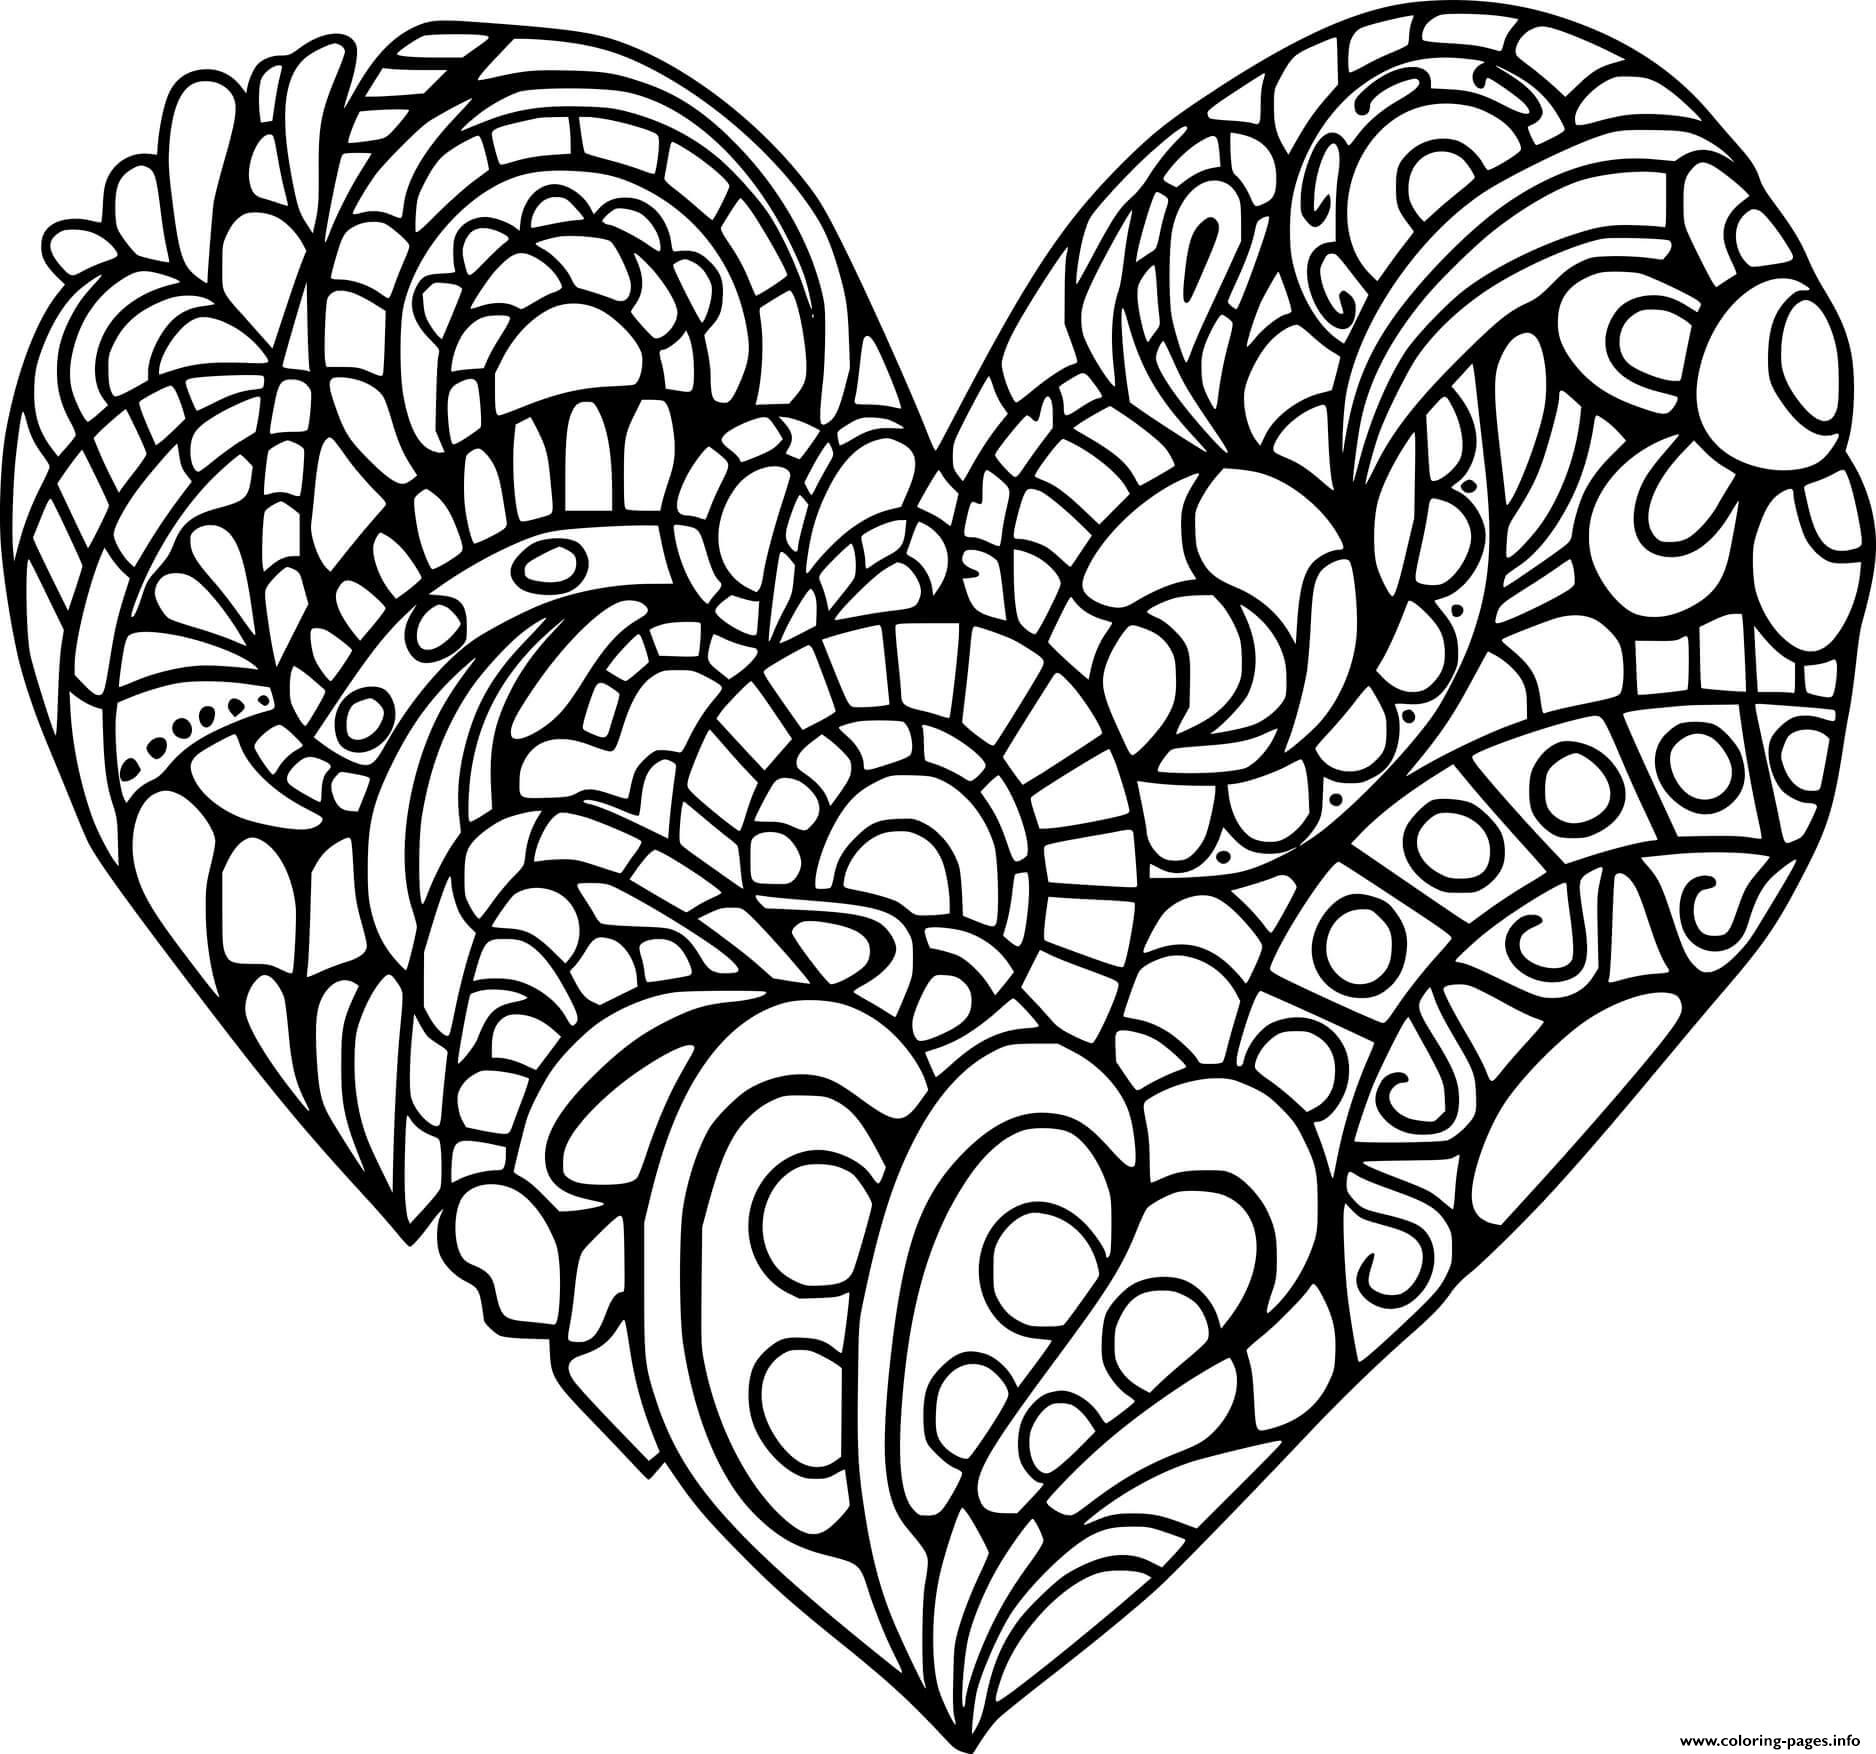 Heart With Complex Patterns coloring